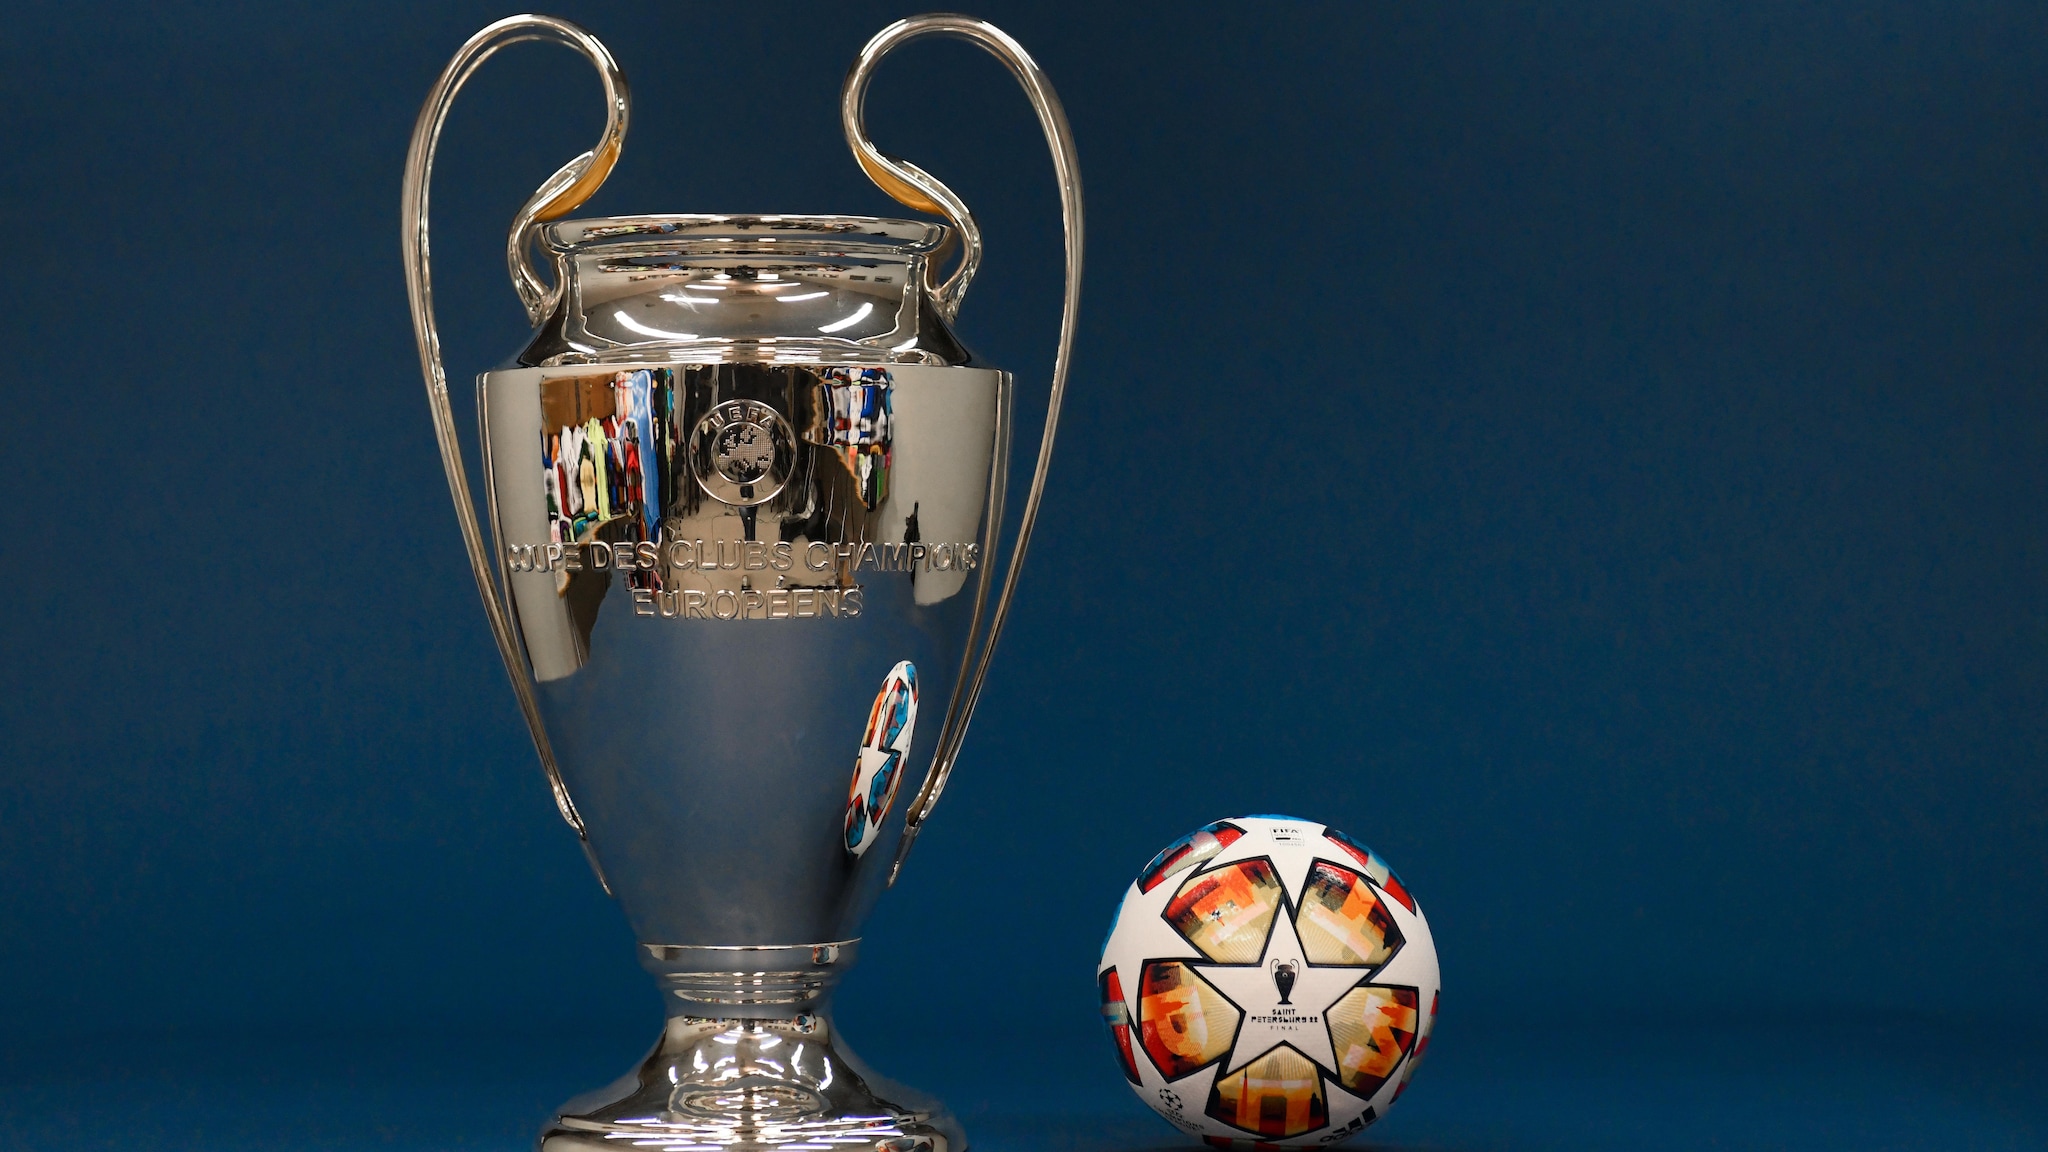 Champions League round of 16: Meet the teams | UEFA Champions League | UEFA .com